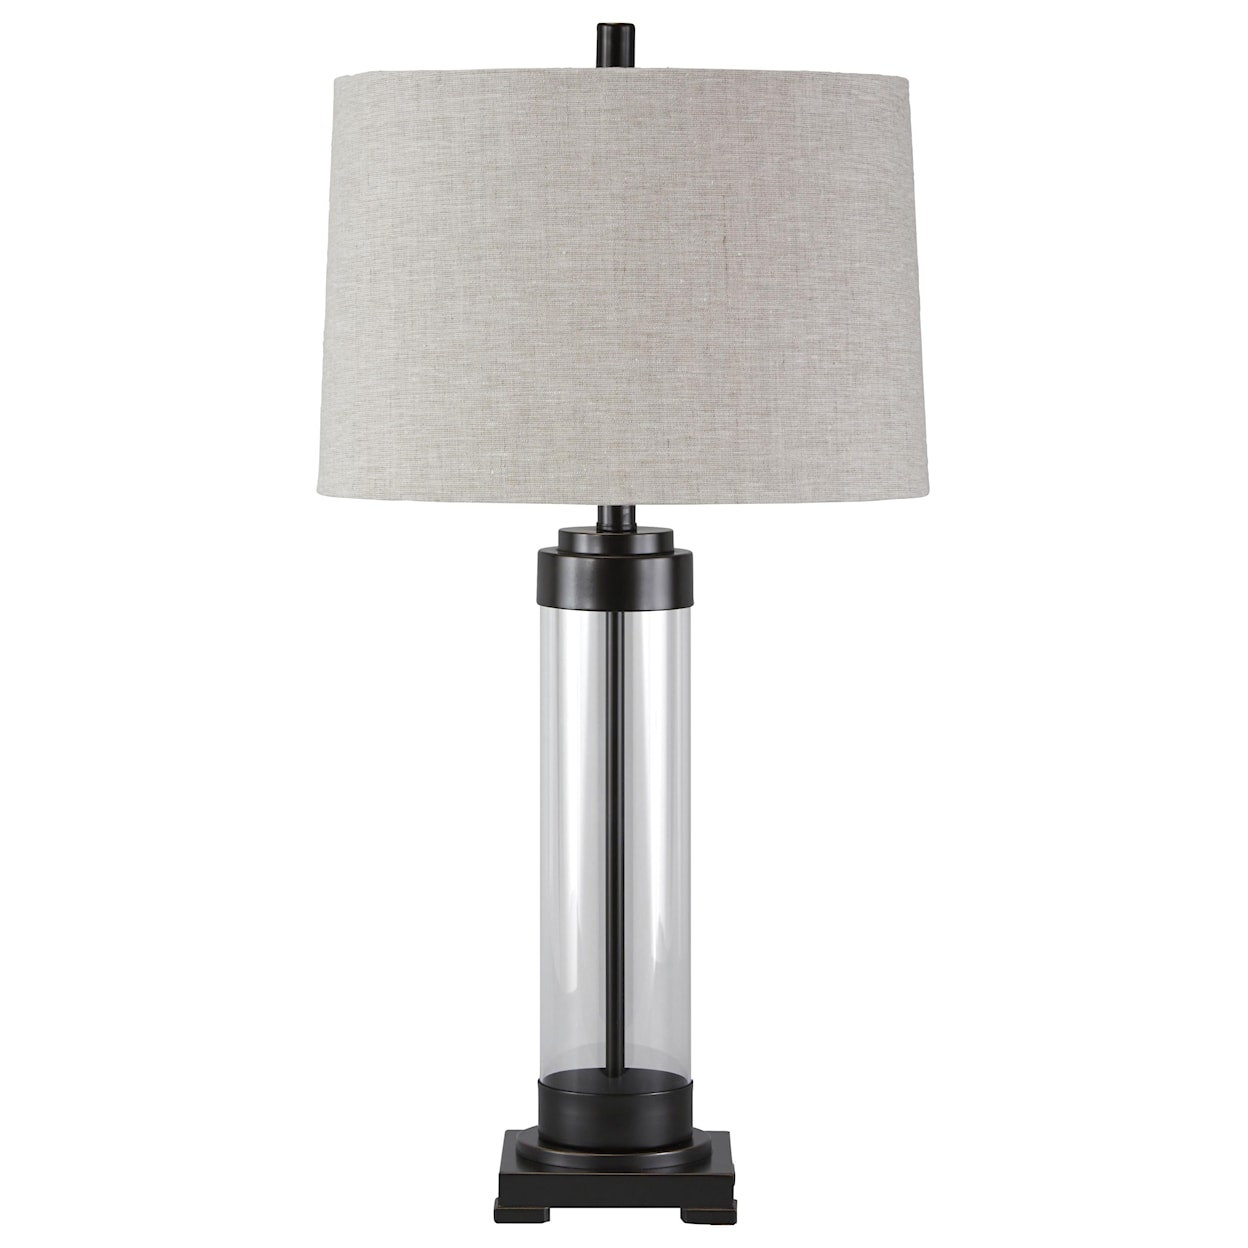 Signature Design Lamps - Vintage Style Talar Glass Table Lamp